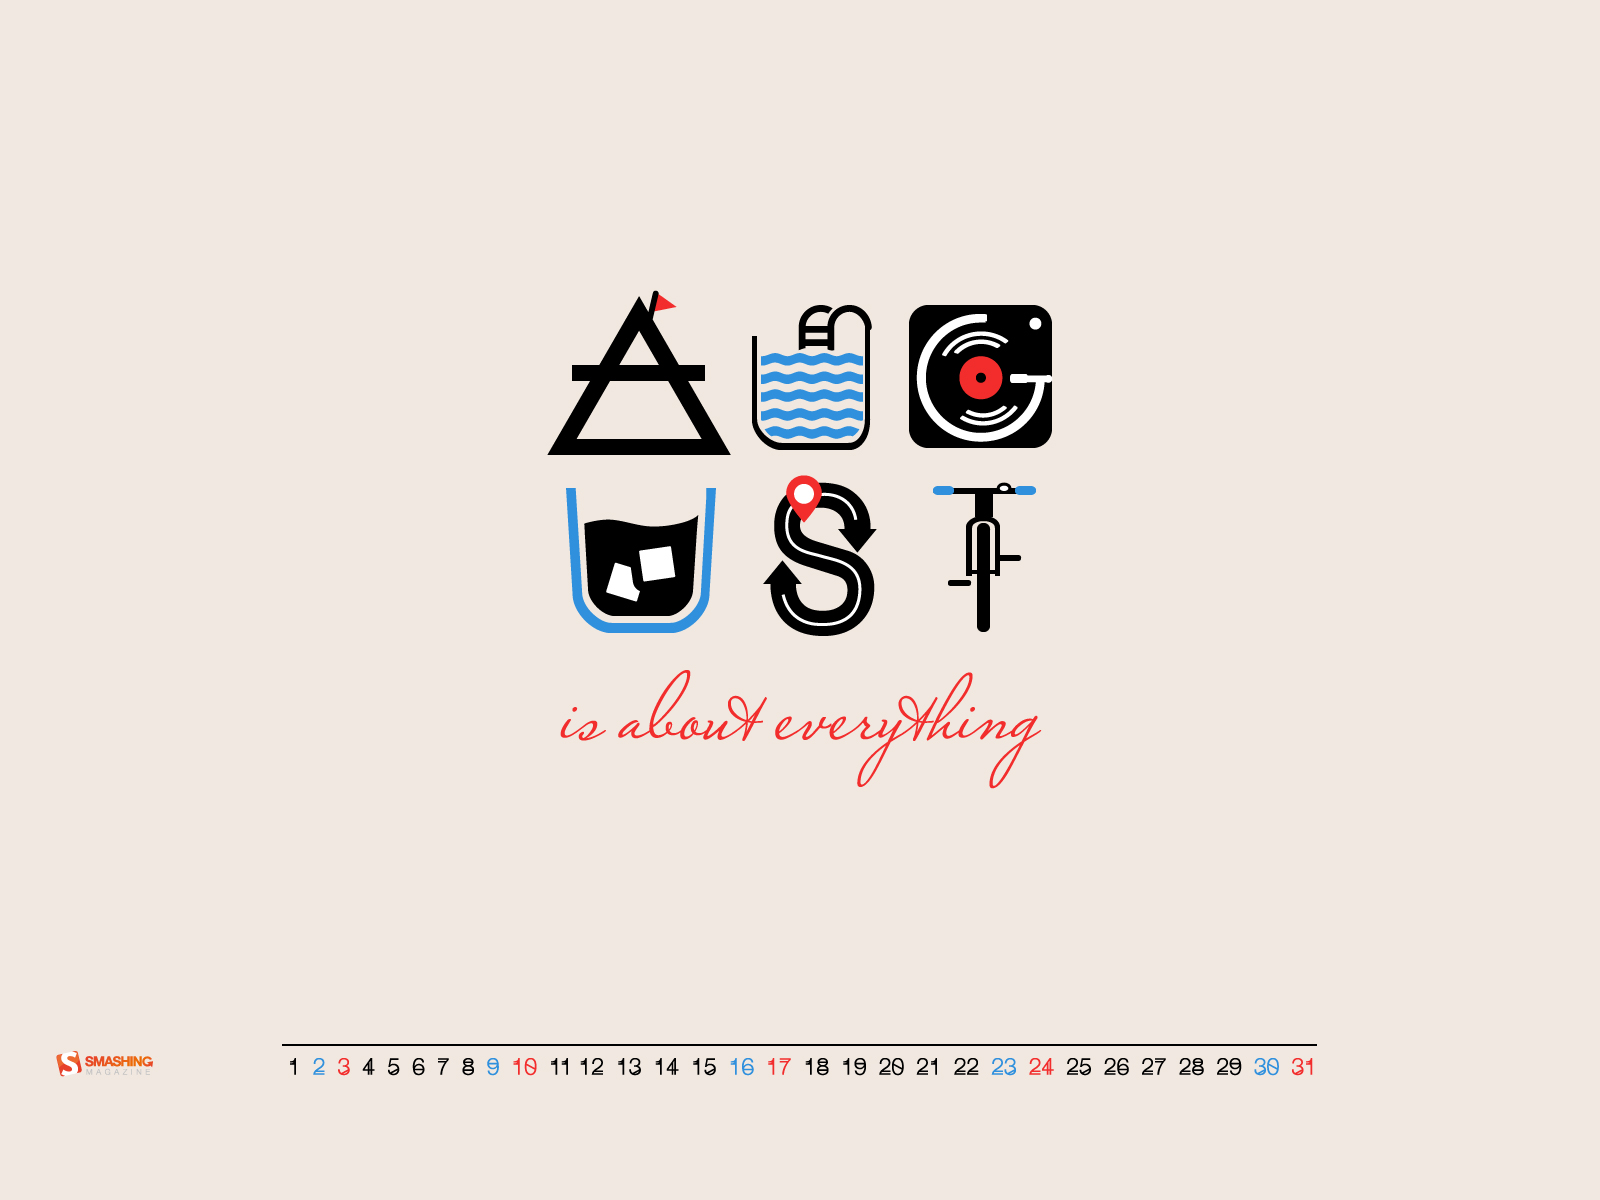 August is about everything wallpaper 2560x1600. - August